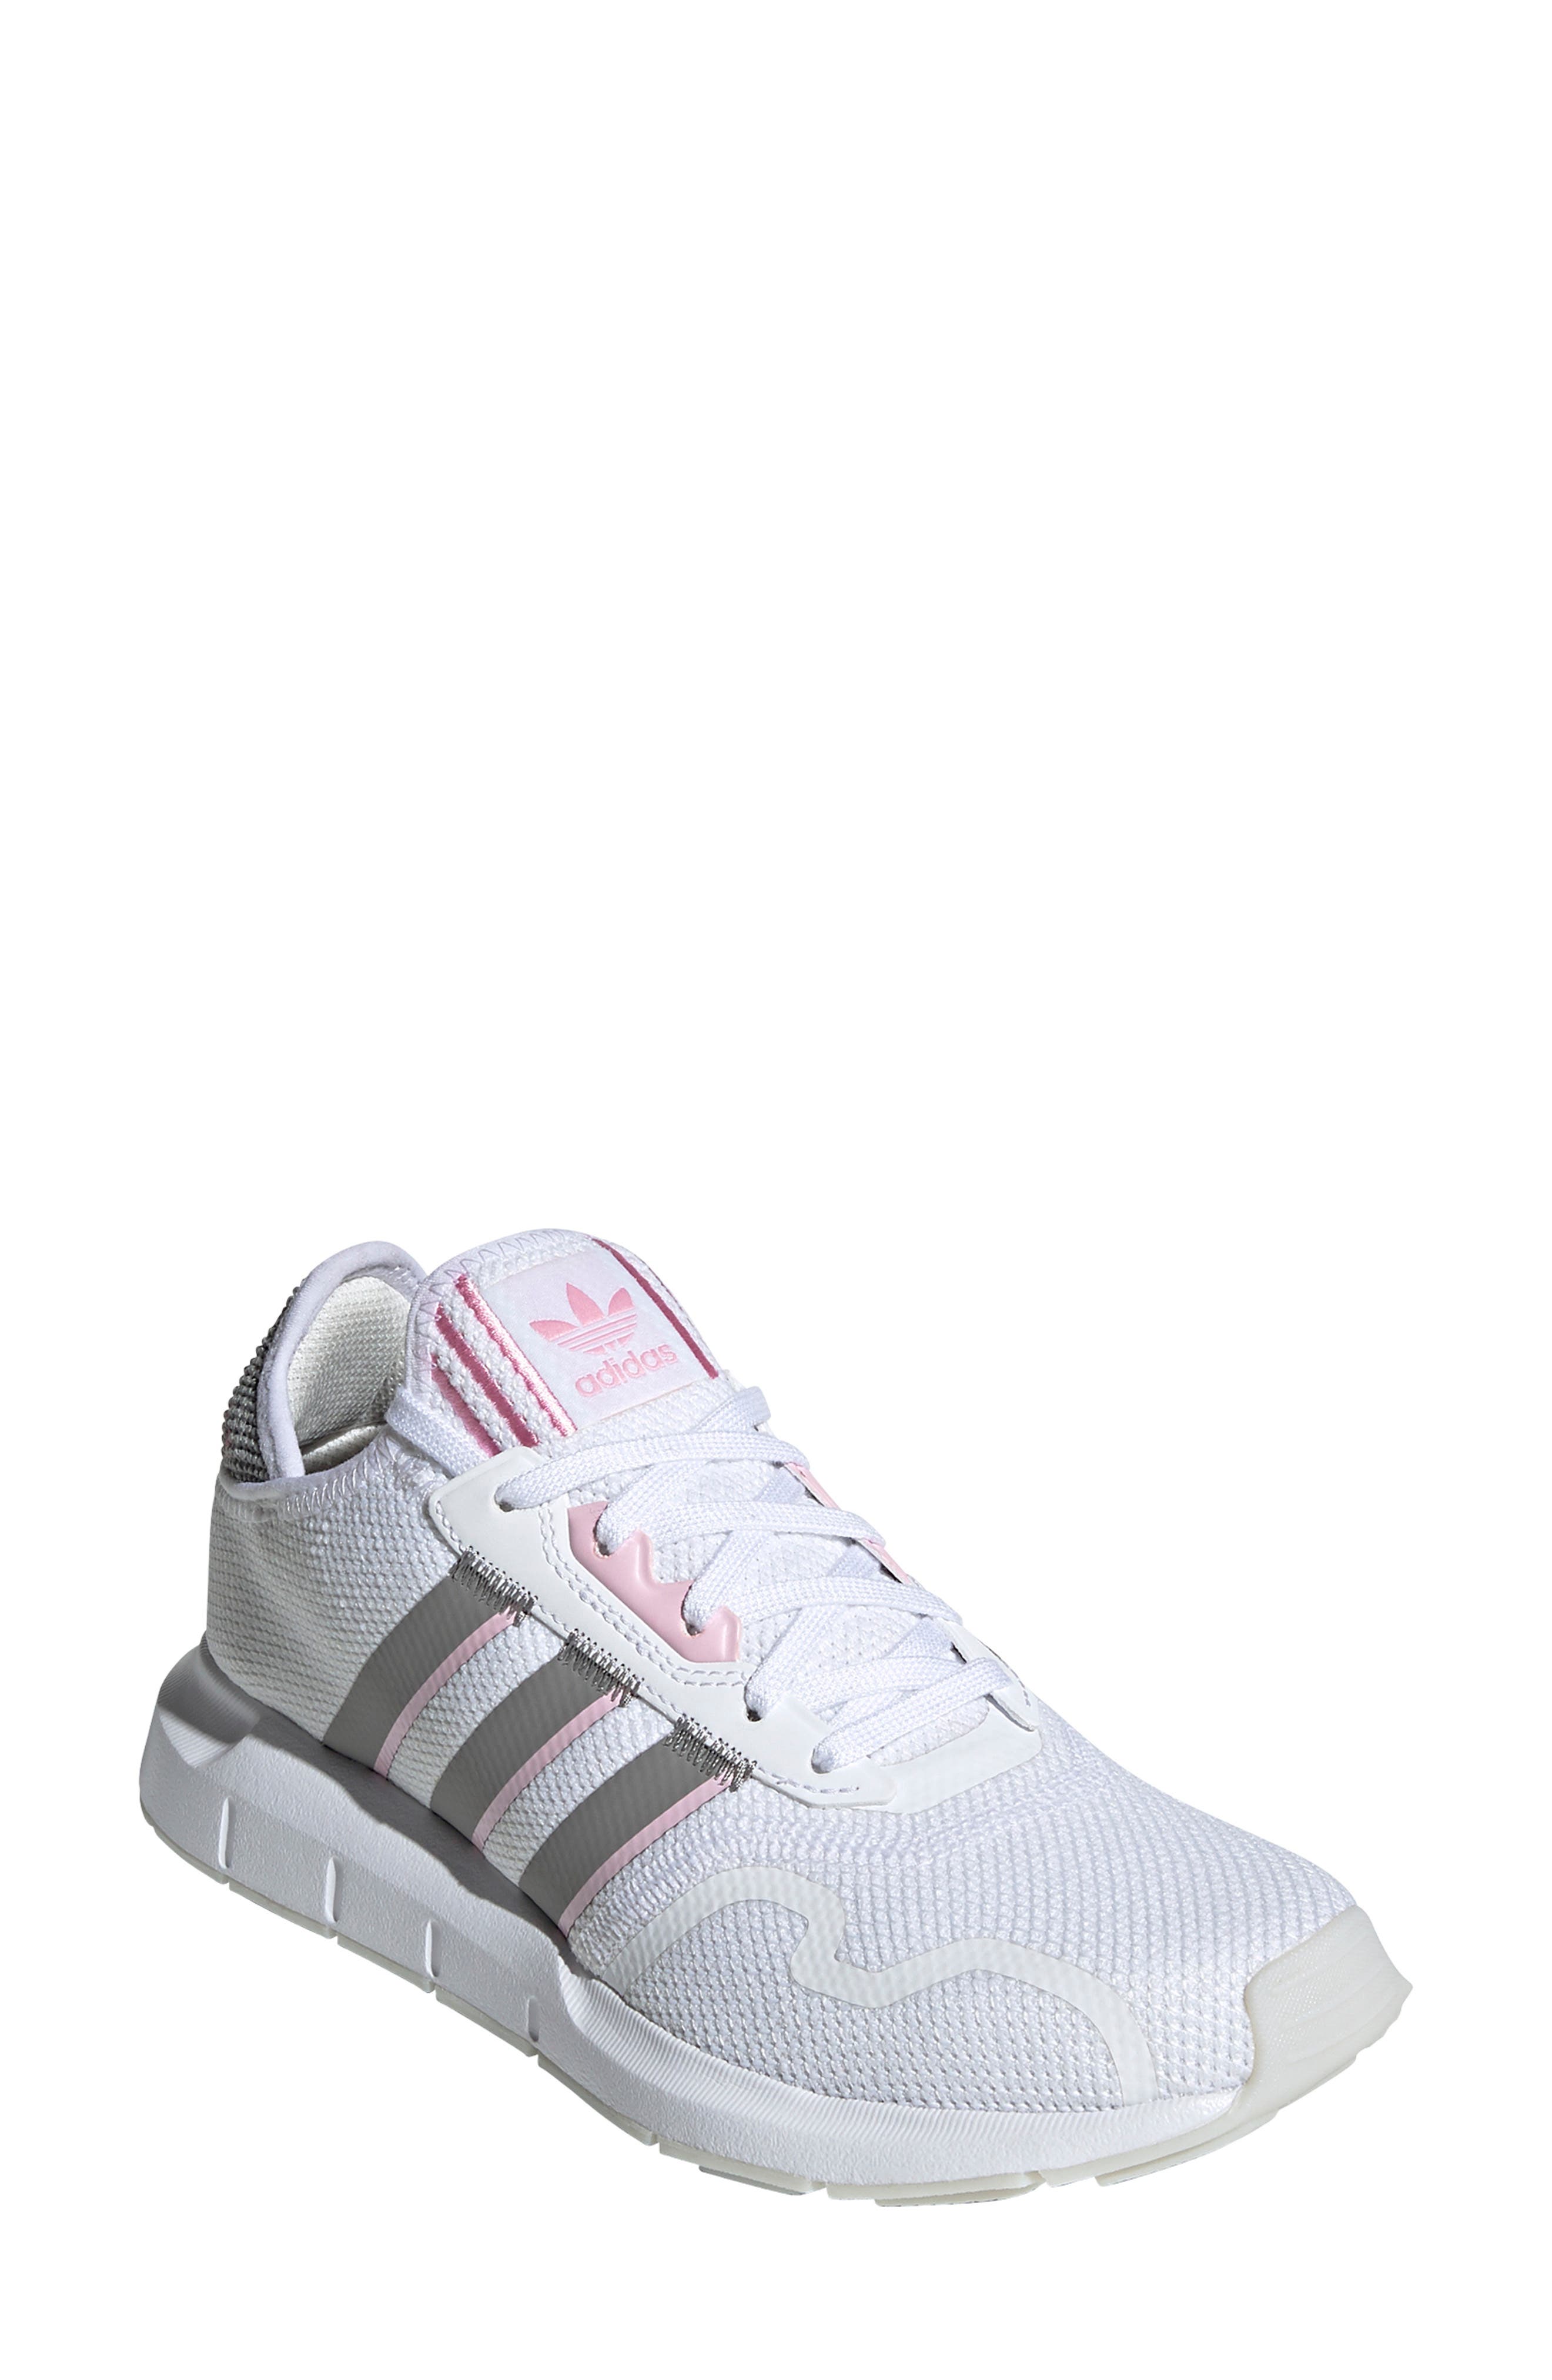 nordstrom adidas womens shoes